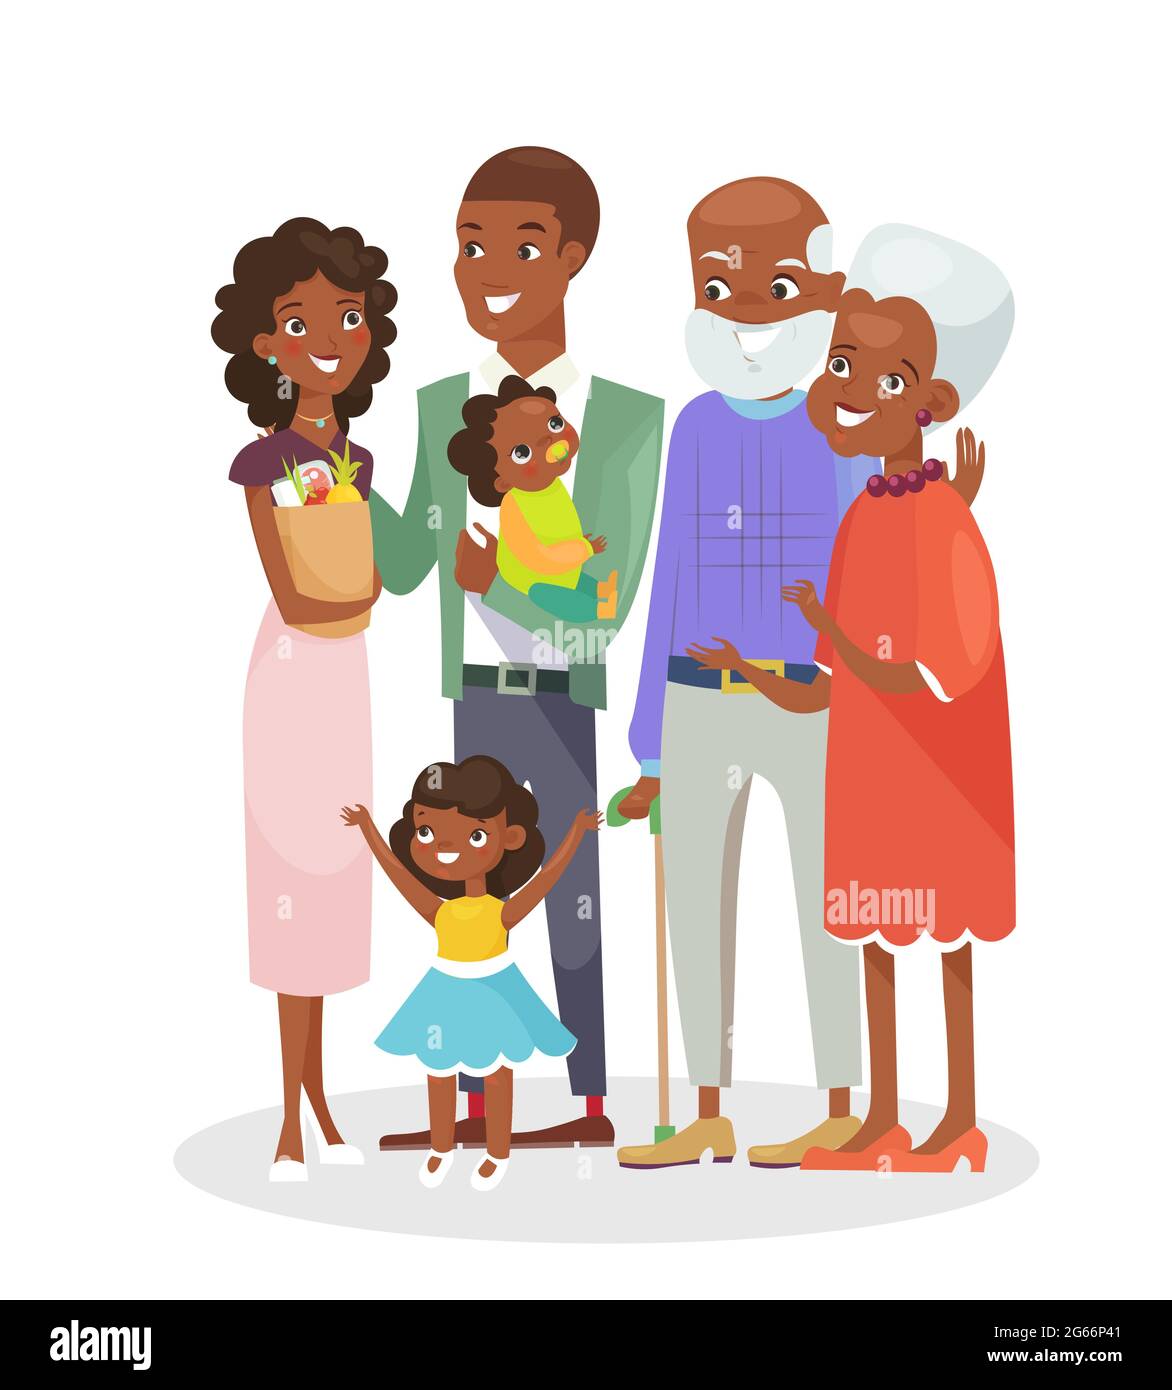 Vector illustration of big happy family portrait. African American grandparents, parents and children together isolated on white background. Smiling Stock Vector